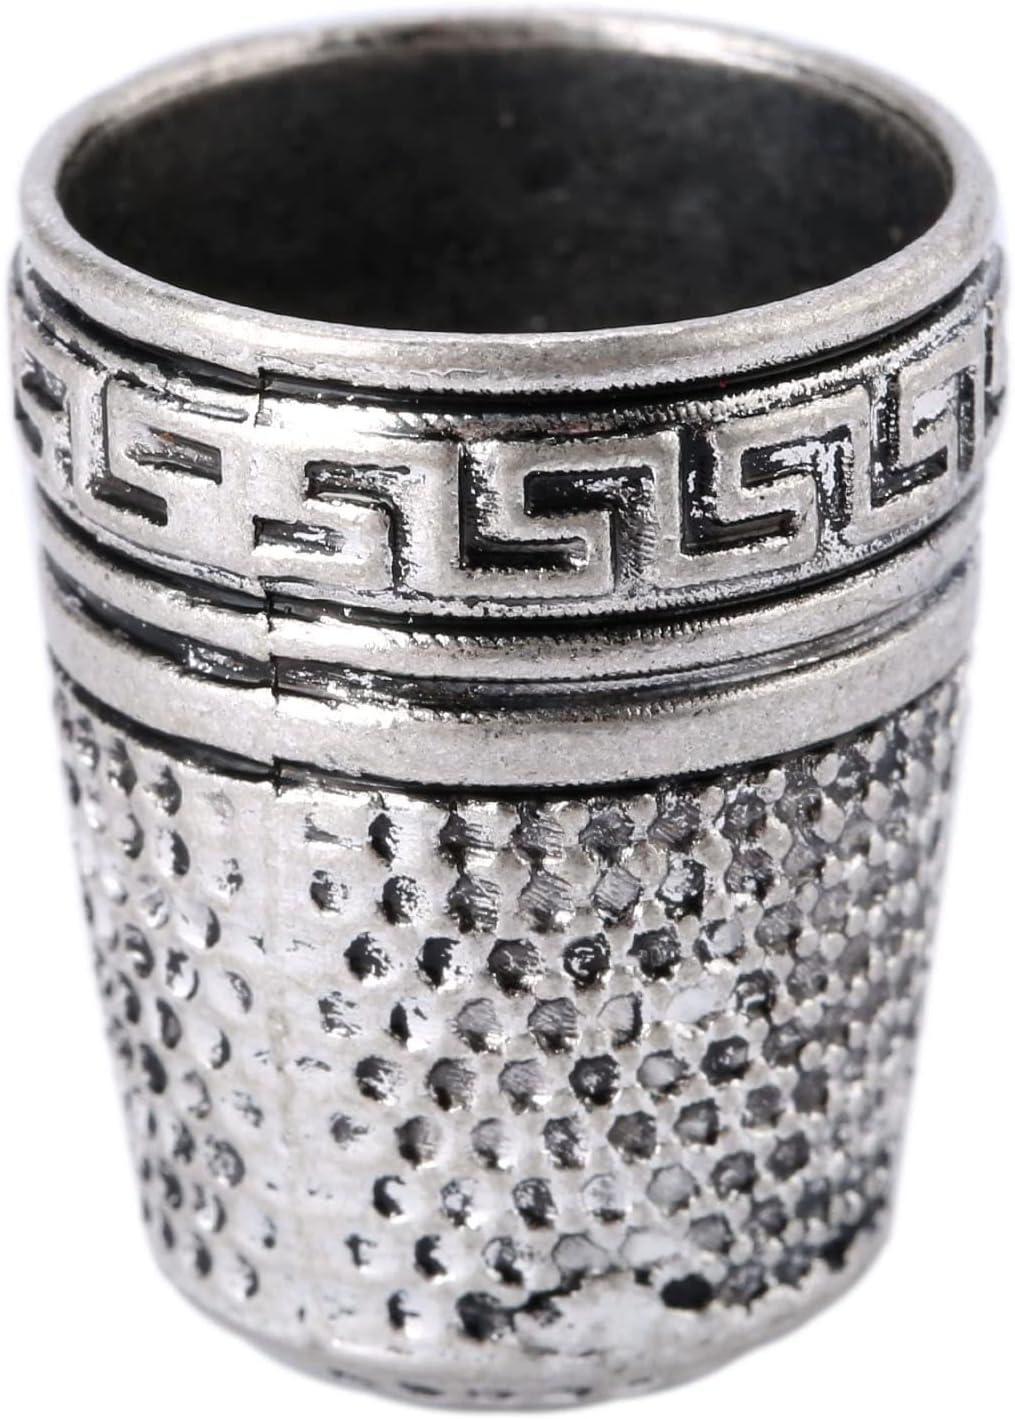 Classical Pattern Hard Pewter Metal Thimble Finger Protector For Sewing  Tools And Needles From Chinaruitradealice, $12.16